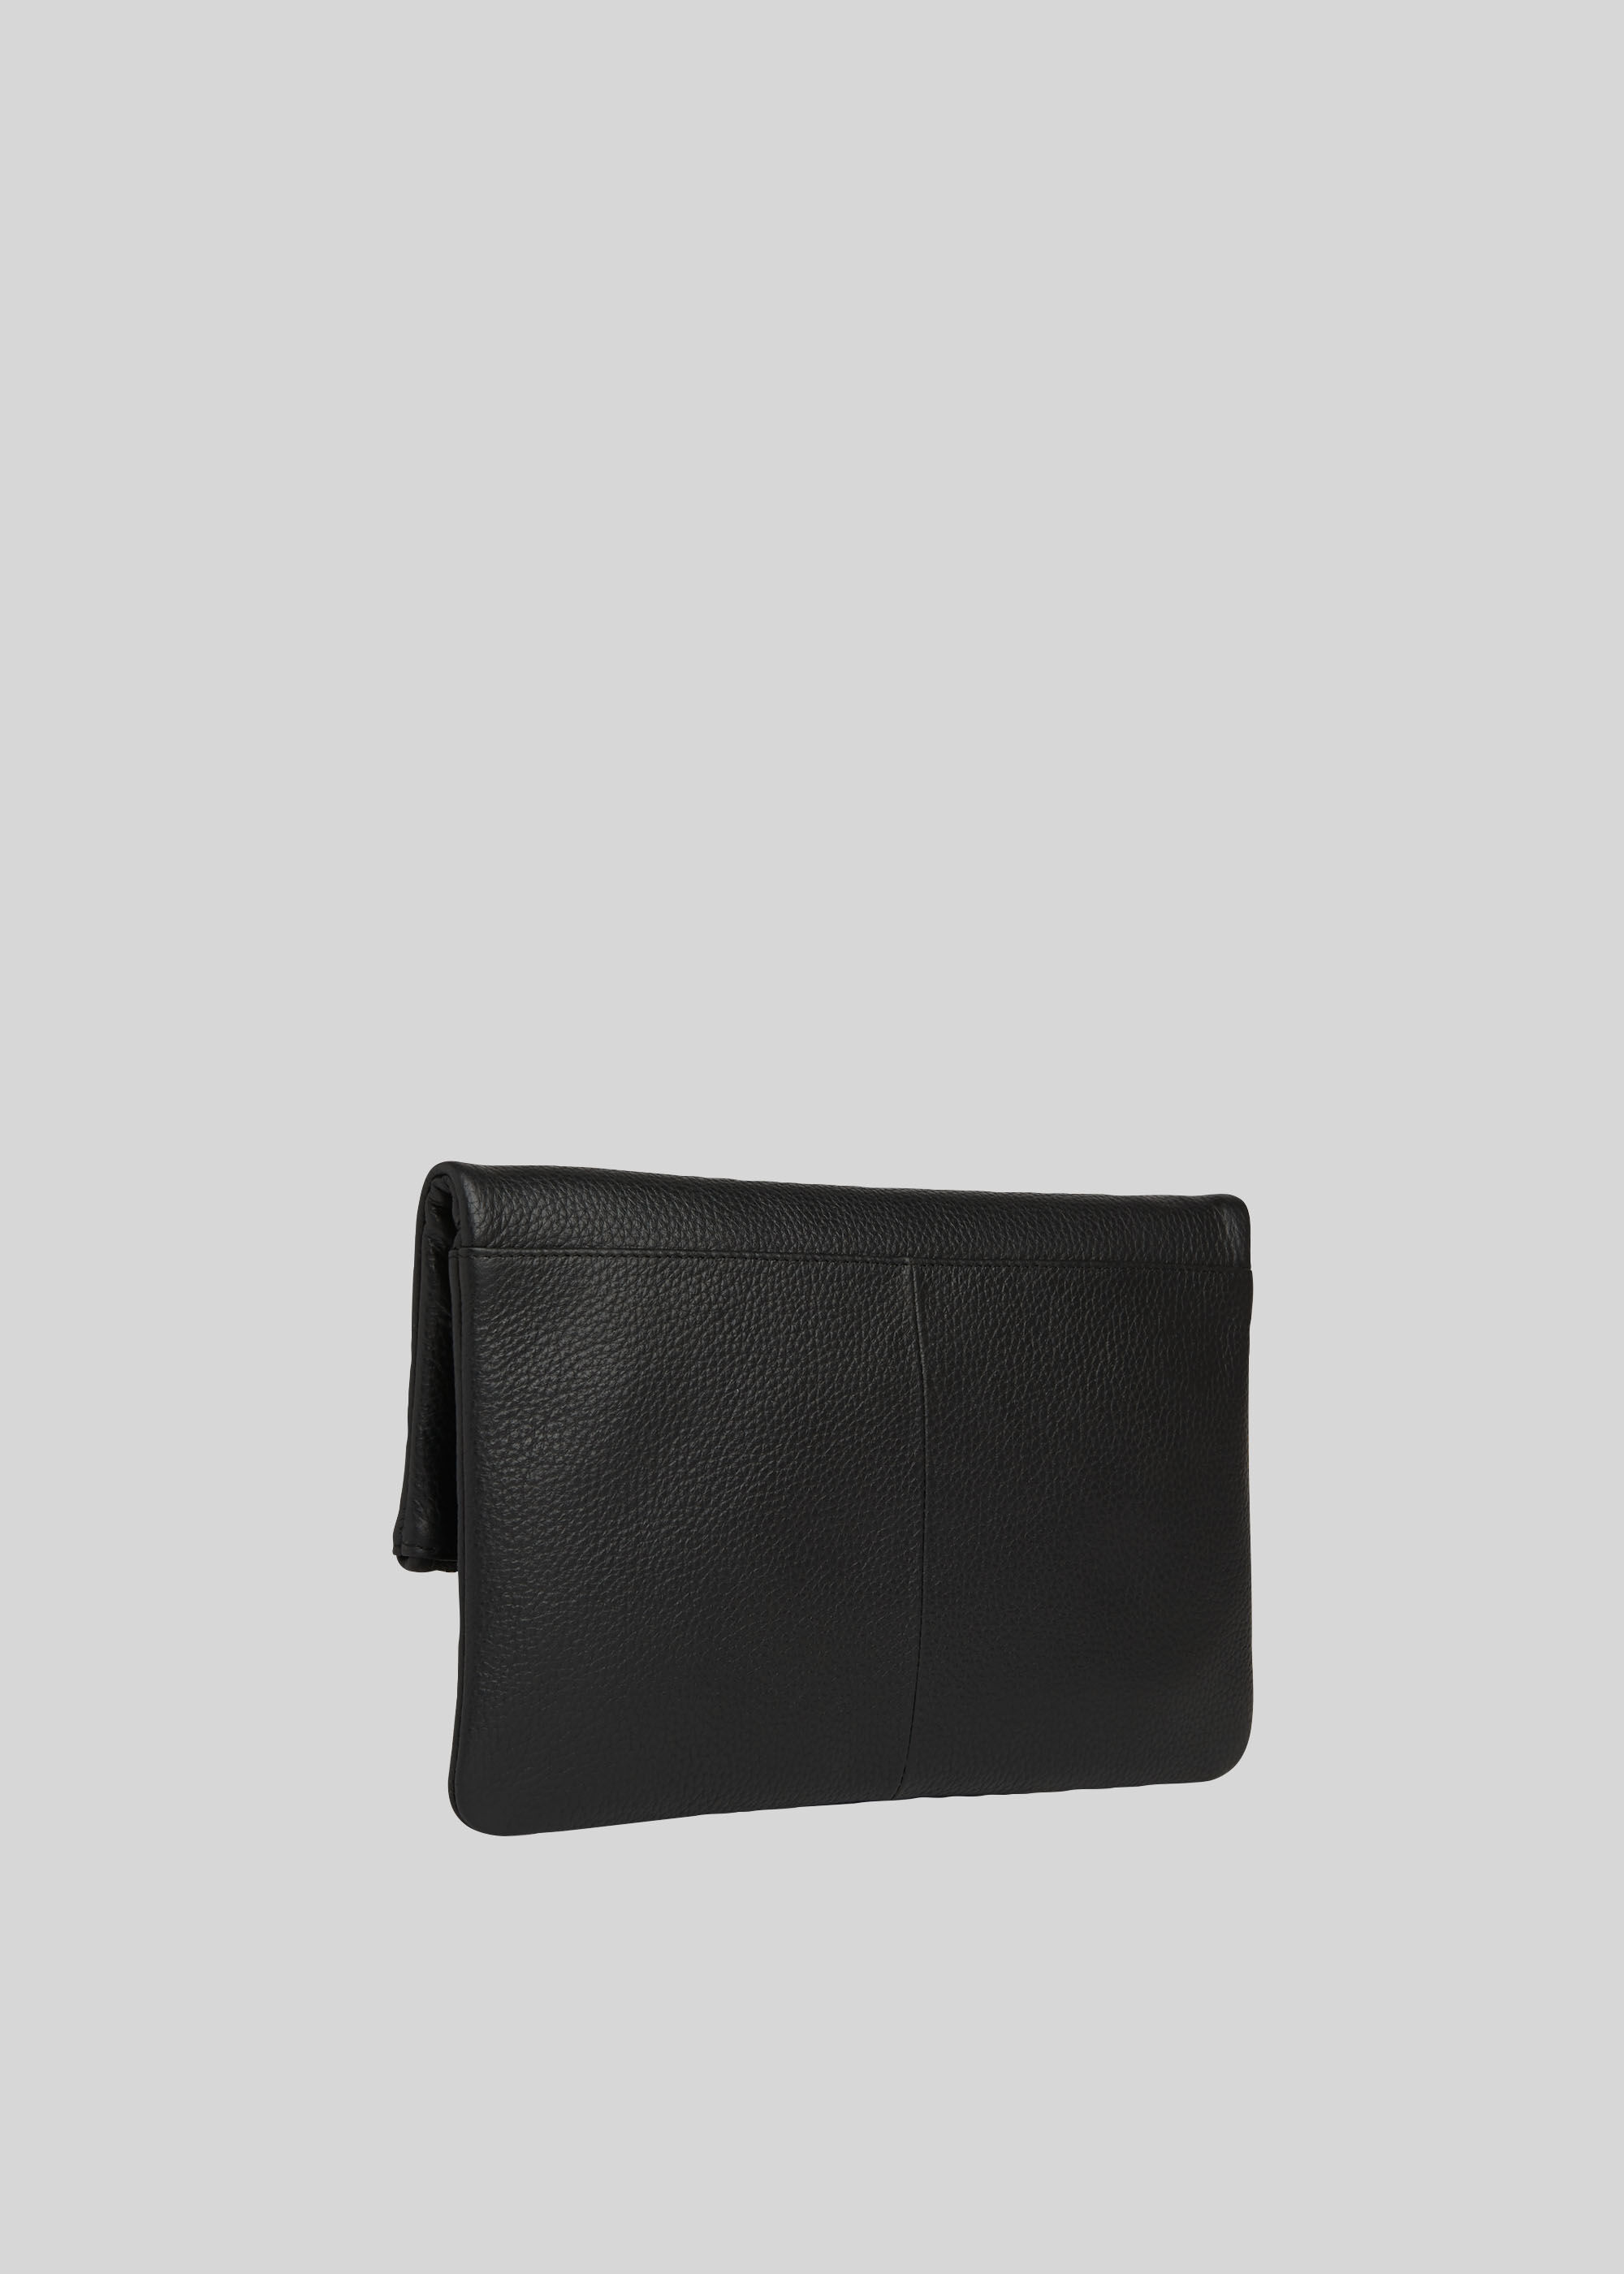 whistles clutch bag